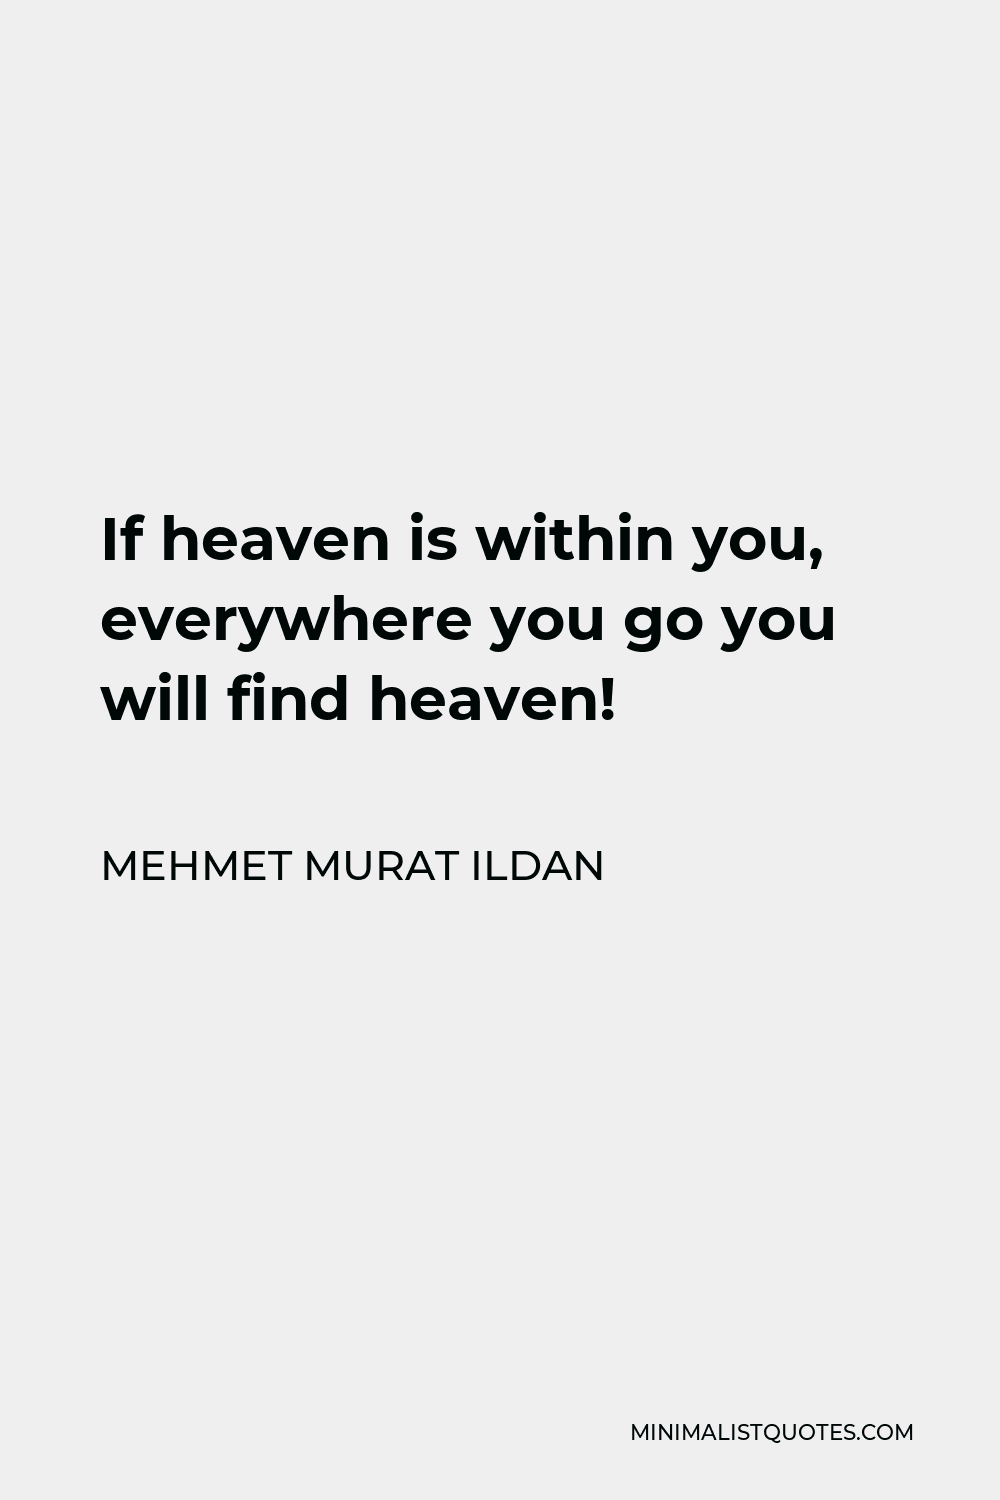 If heaven is within you, everywhere you go you will find heaven